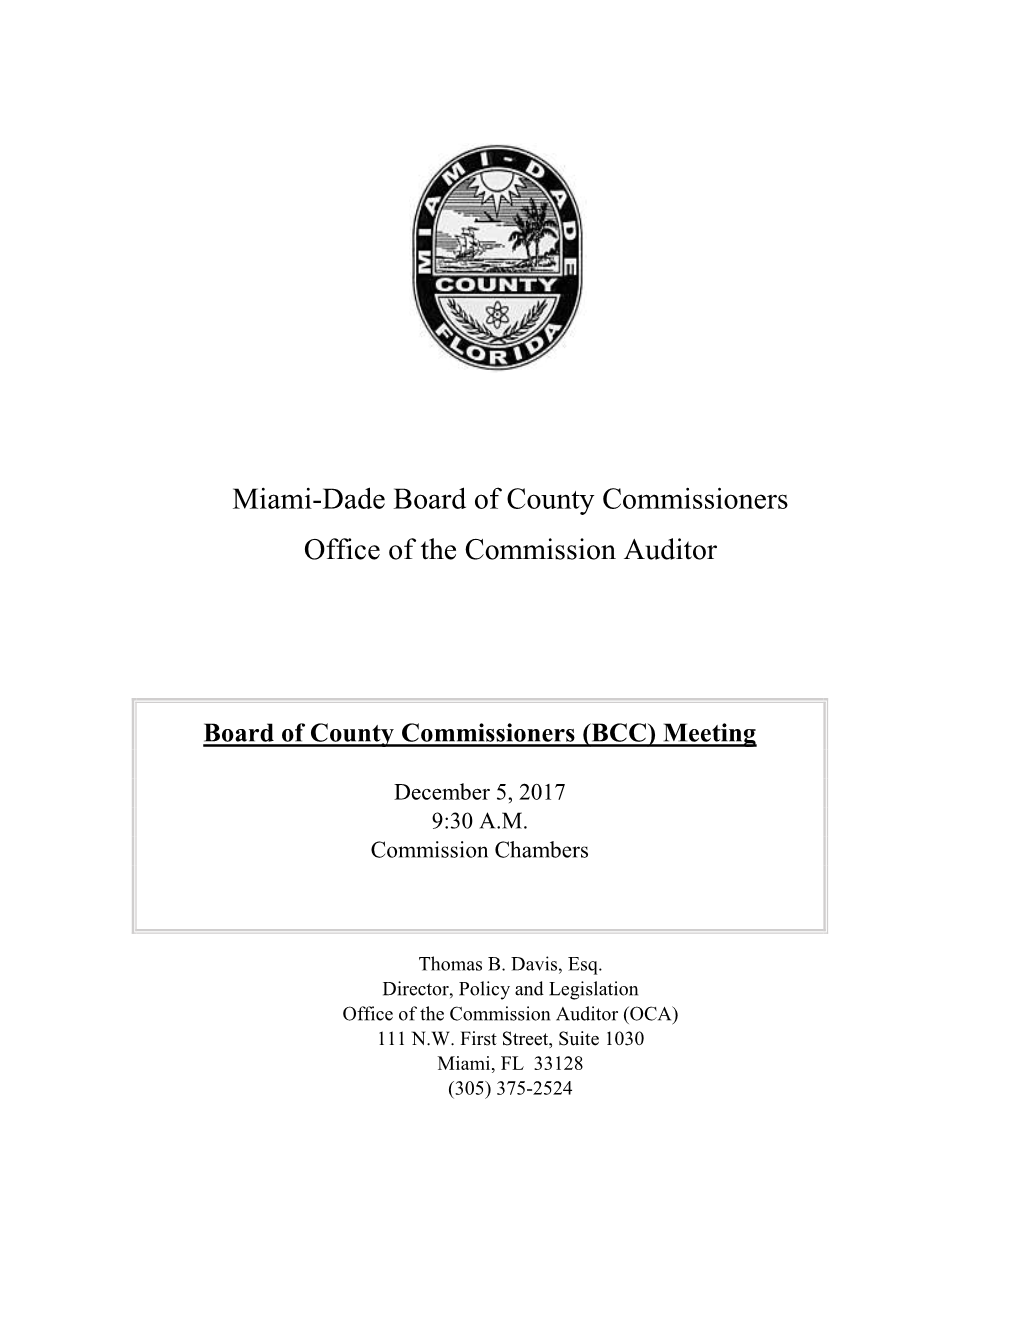 Miami-Dade Board of County Commissioners Office of the Commission Auditor